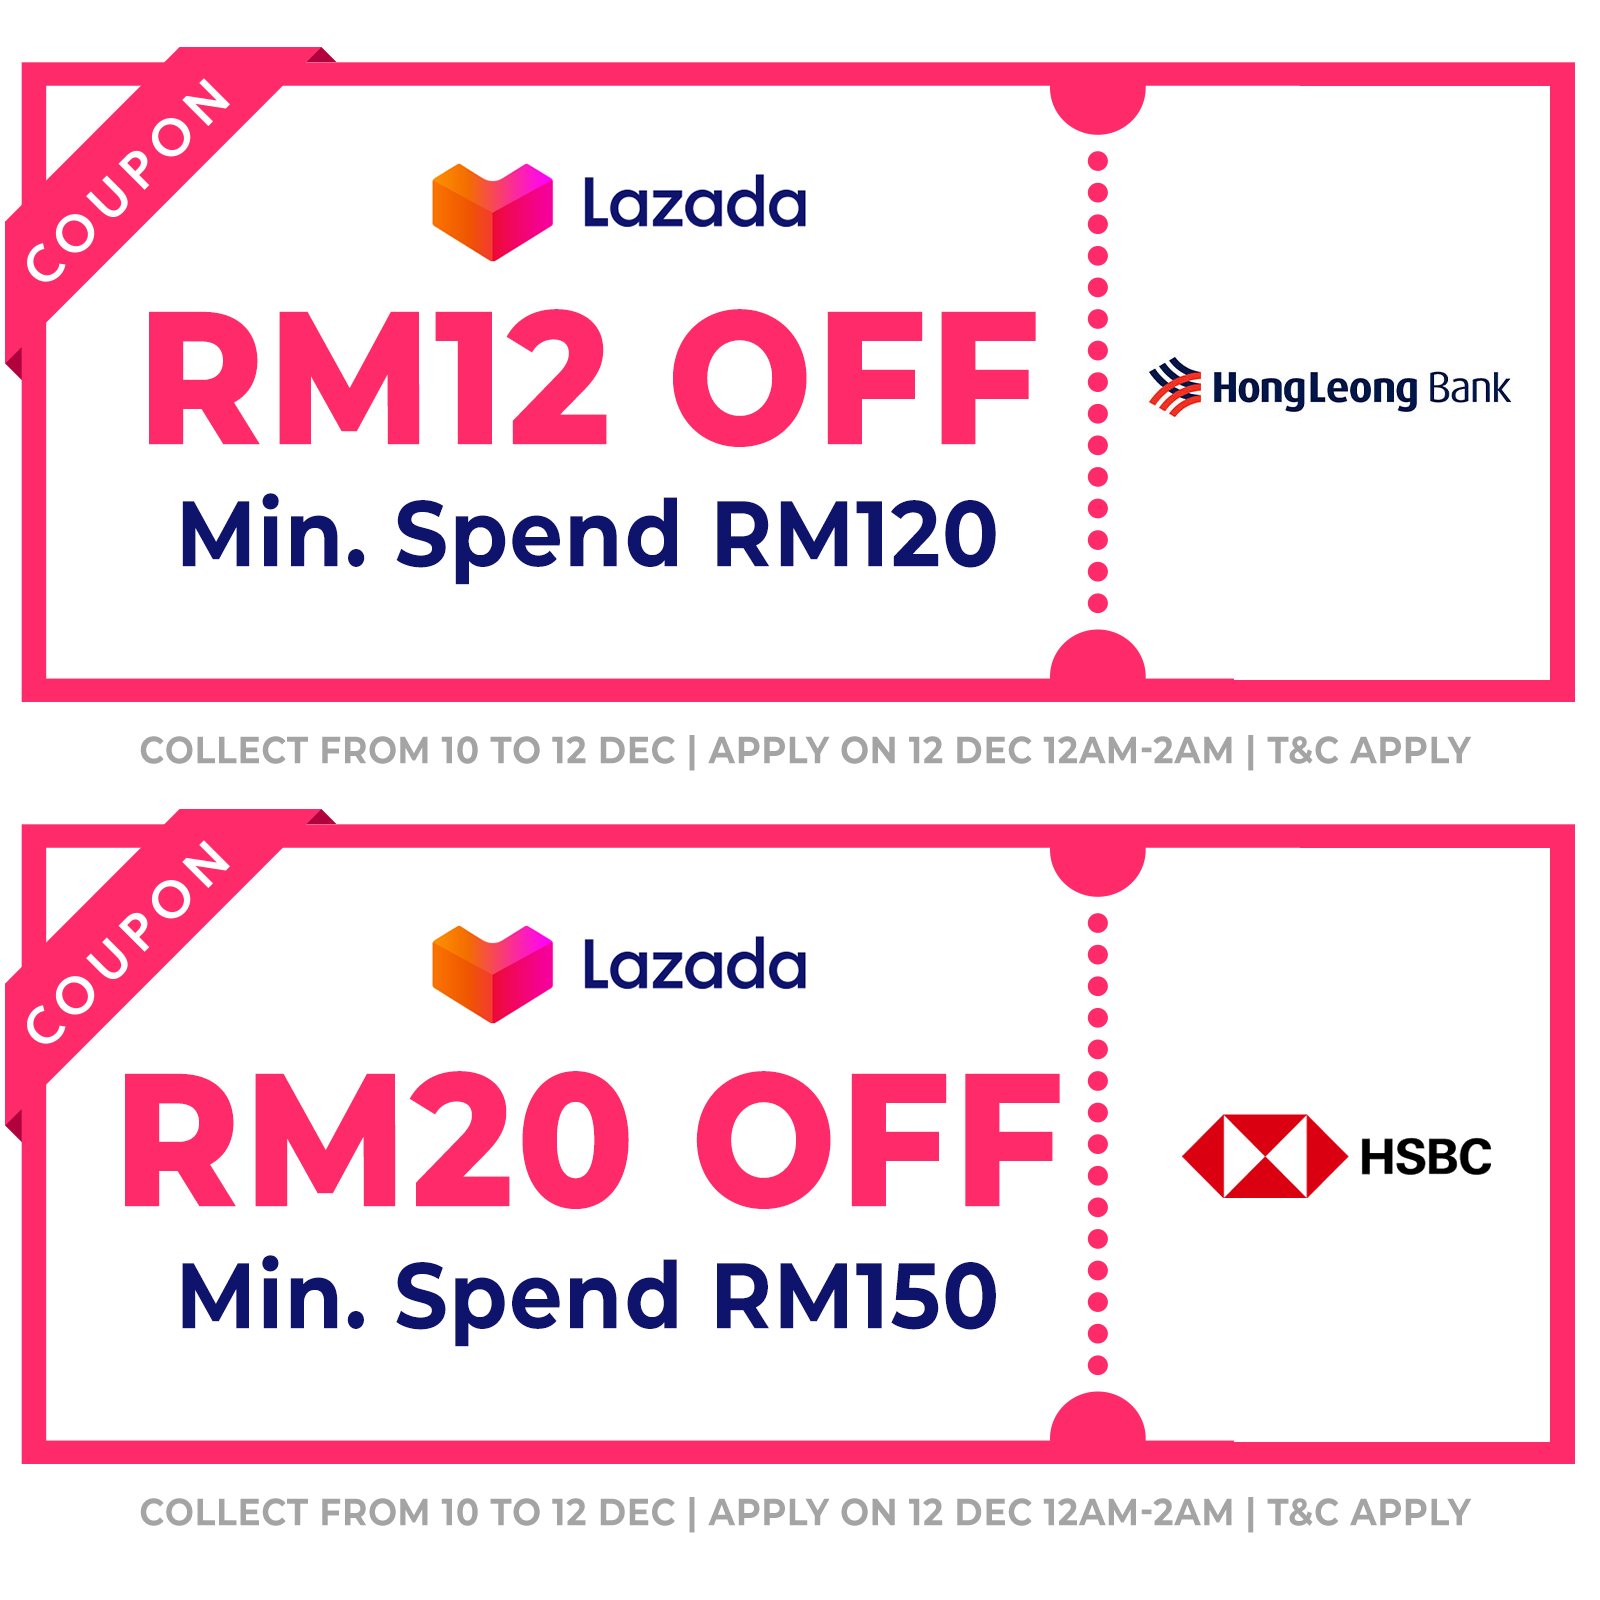 cover-1212-lazada-all-vouchers-bank-code-2